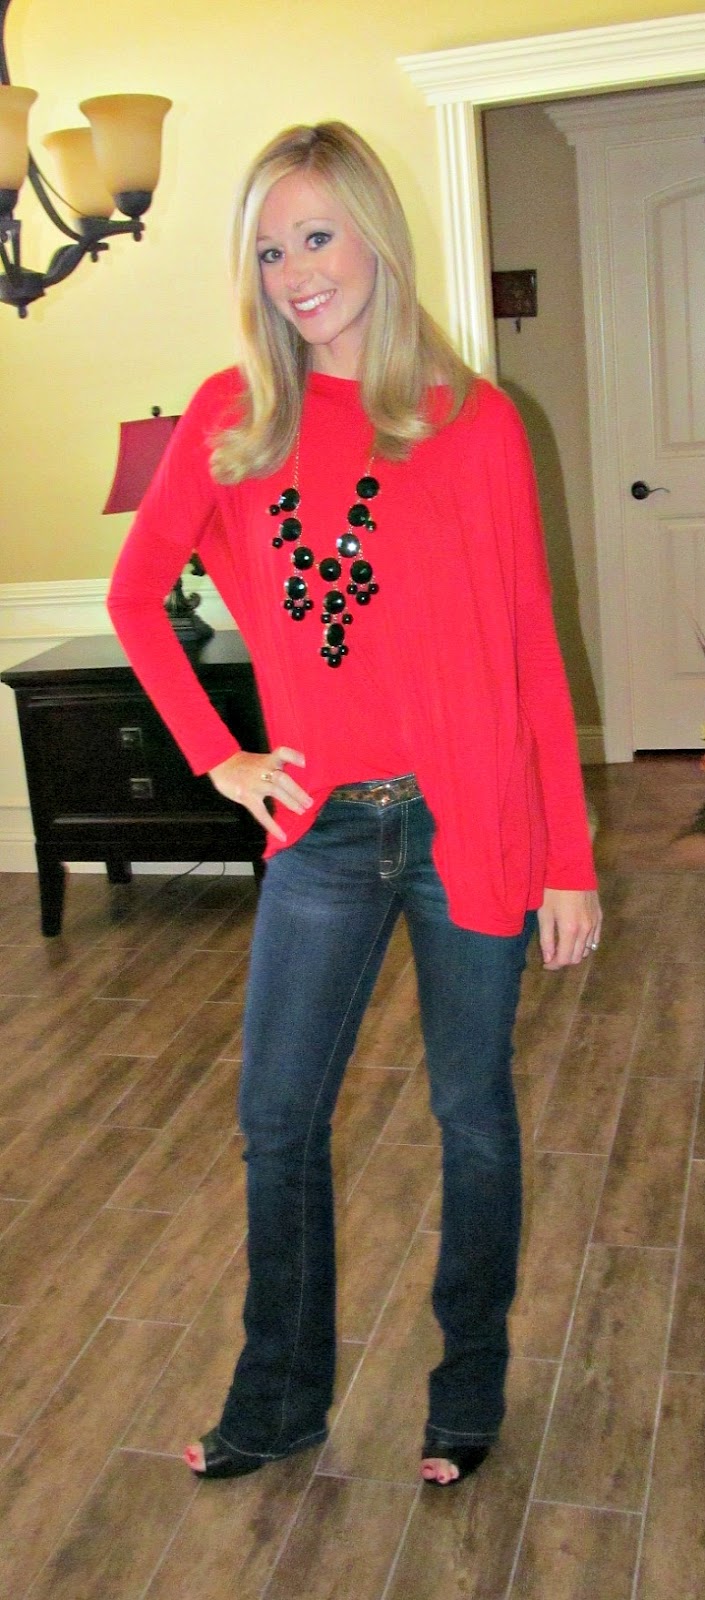 A Blonde Ambition: My Outfit Pics Featuring OCJ Collegiate Denim!